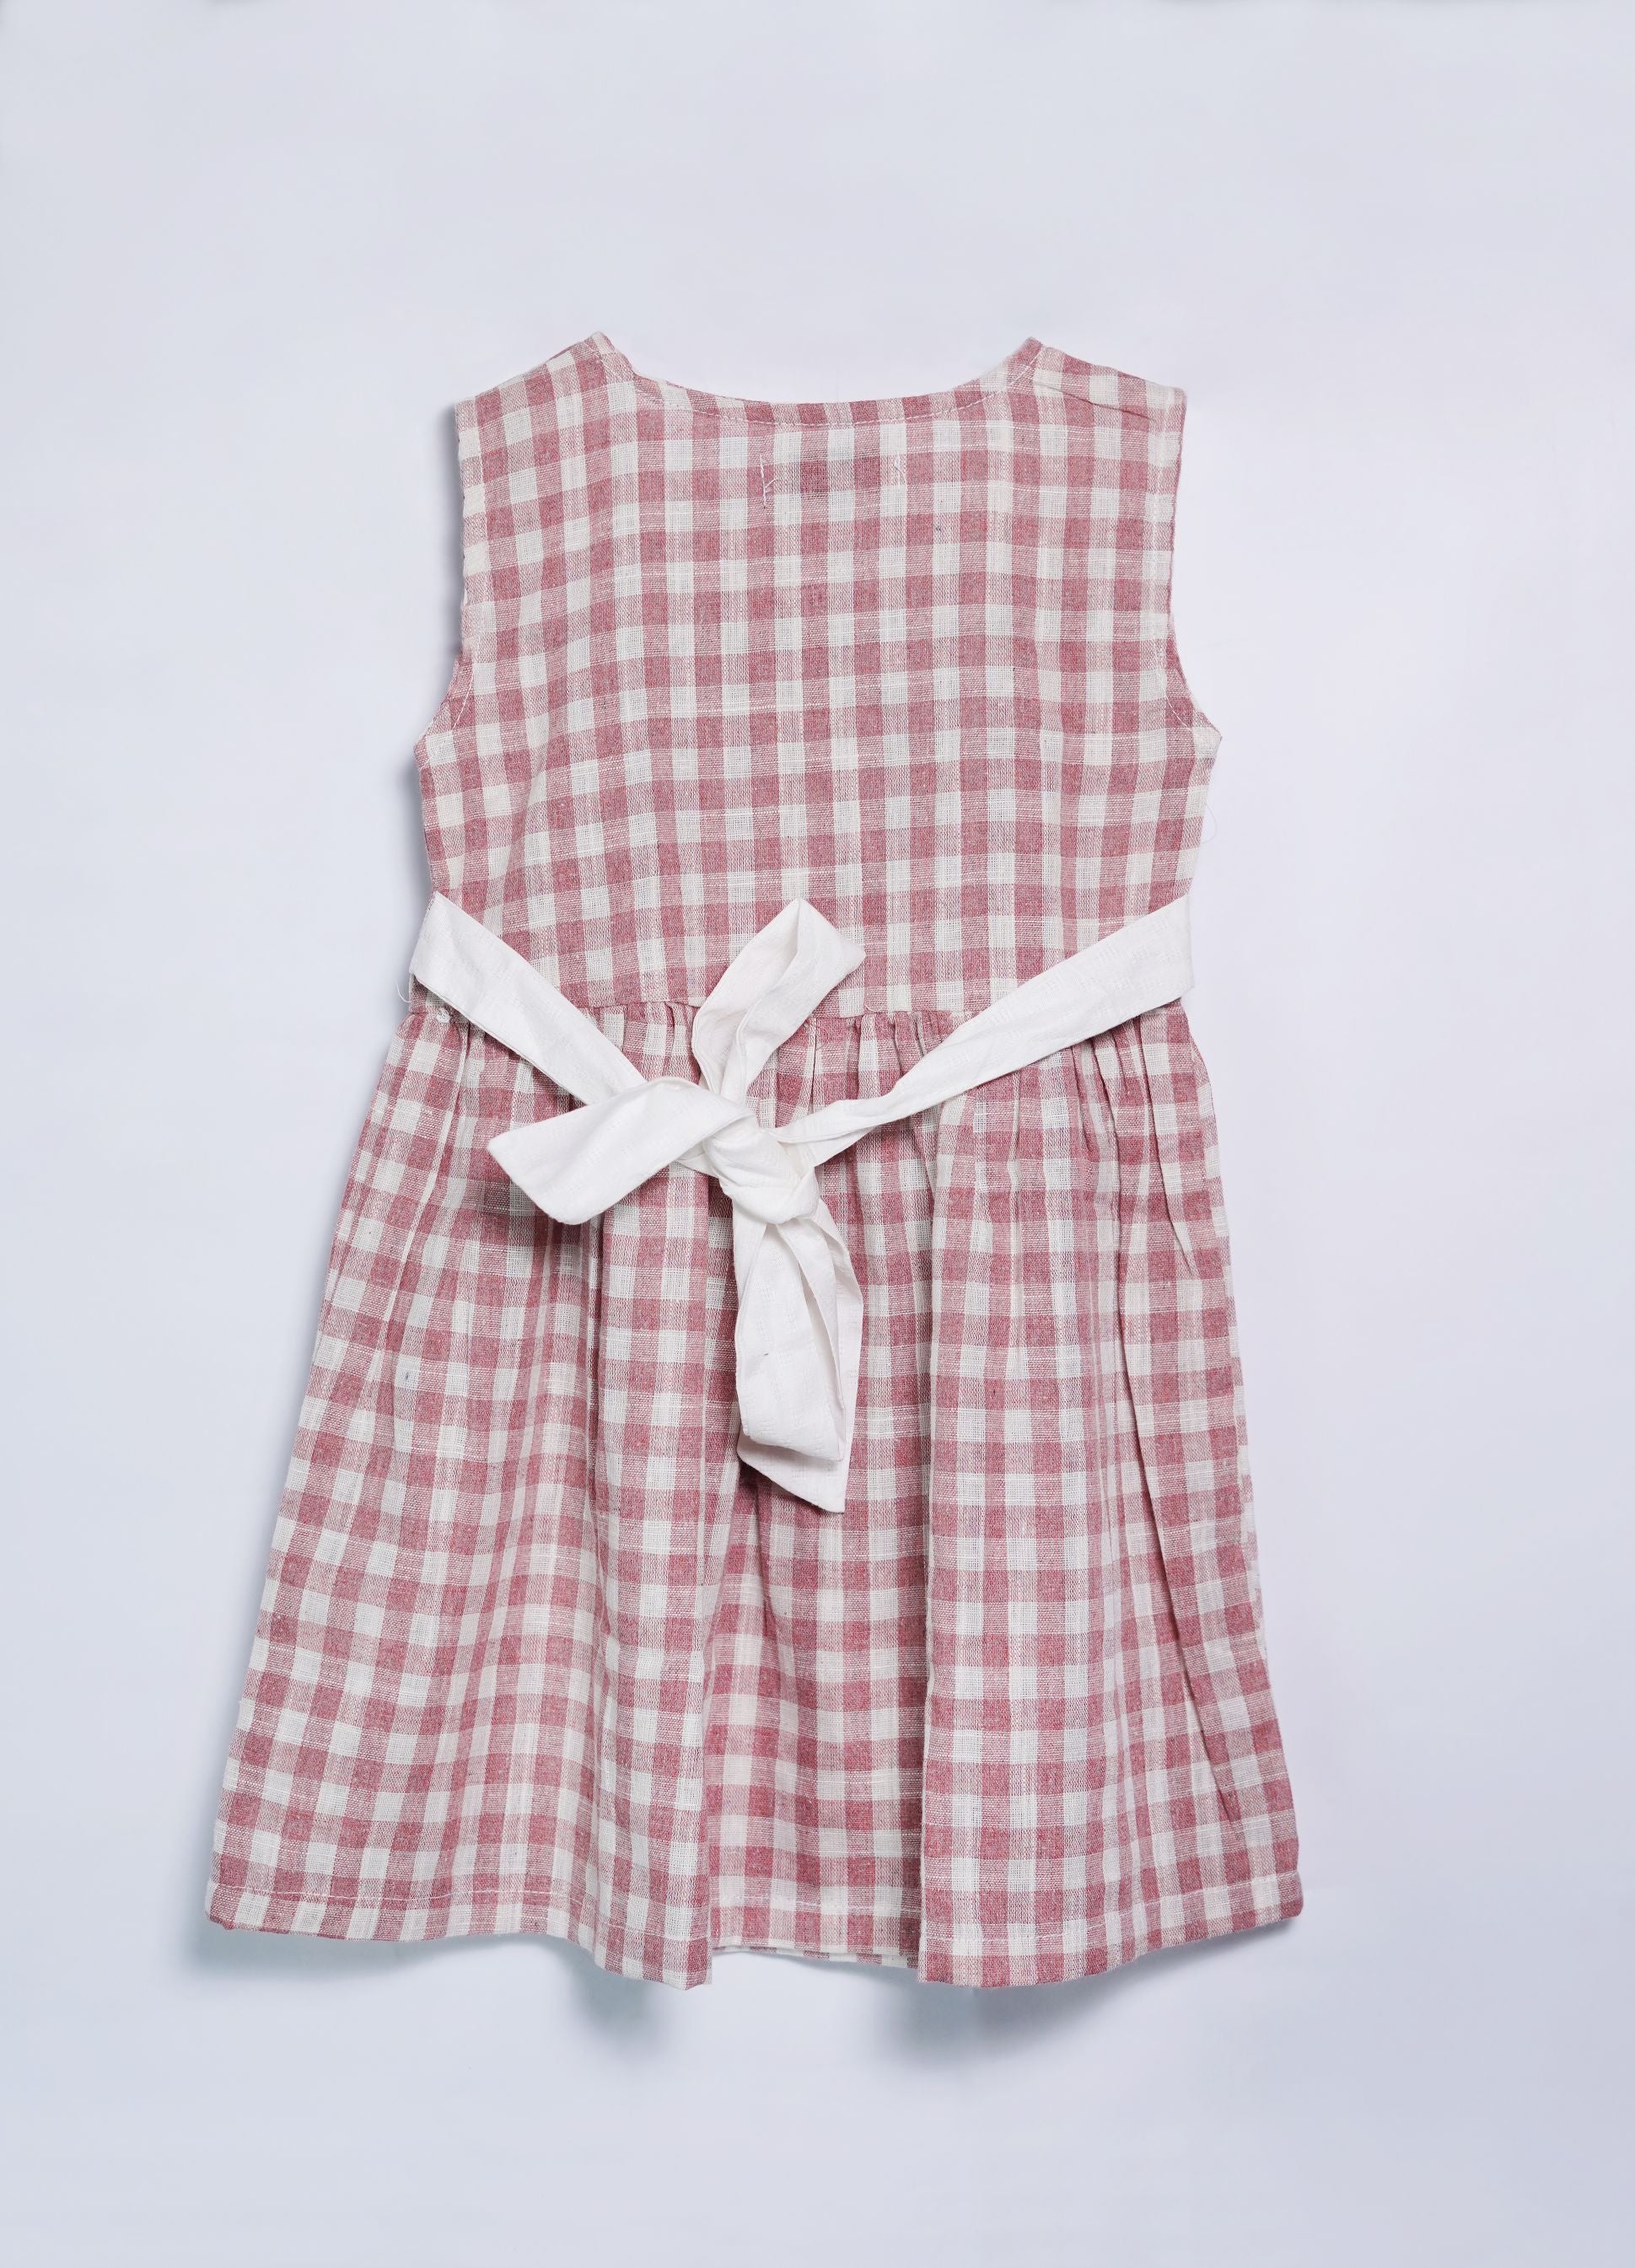 Check Cotton Frock for girls